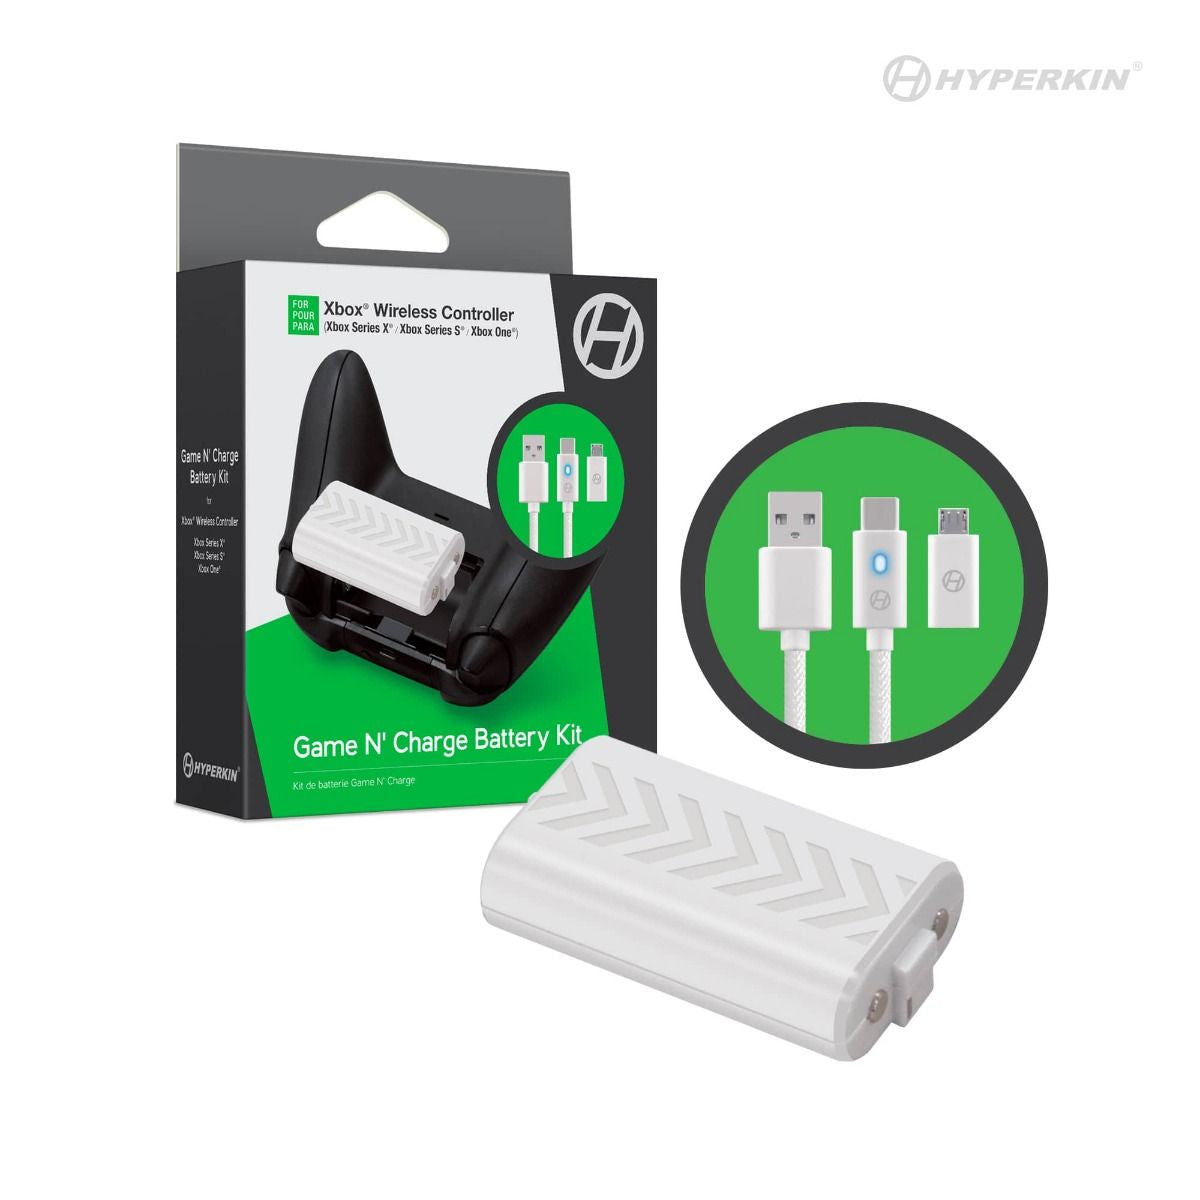 "Game N' Charge" Battery Kit (White)